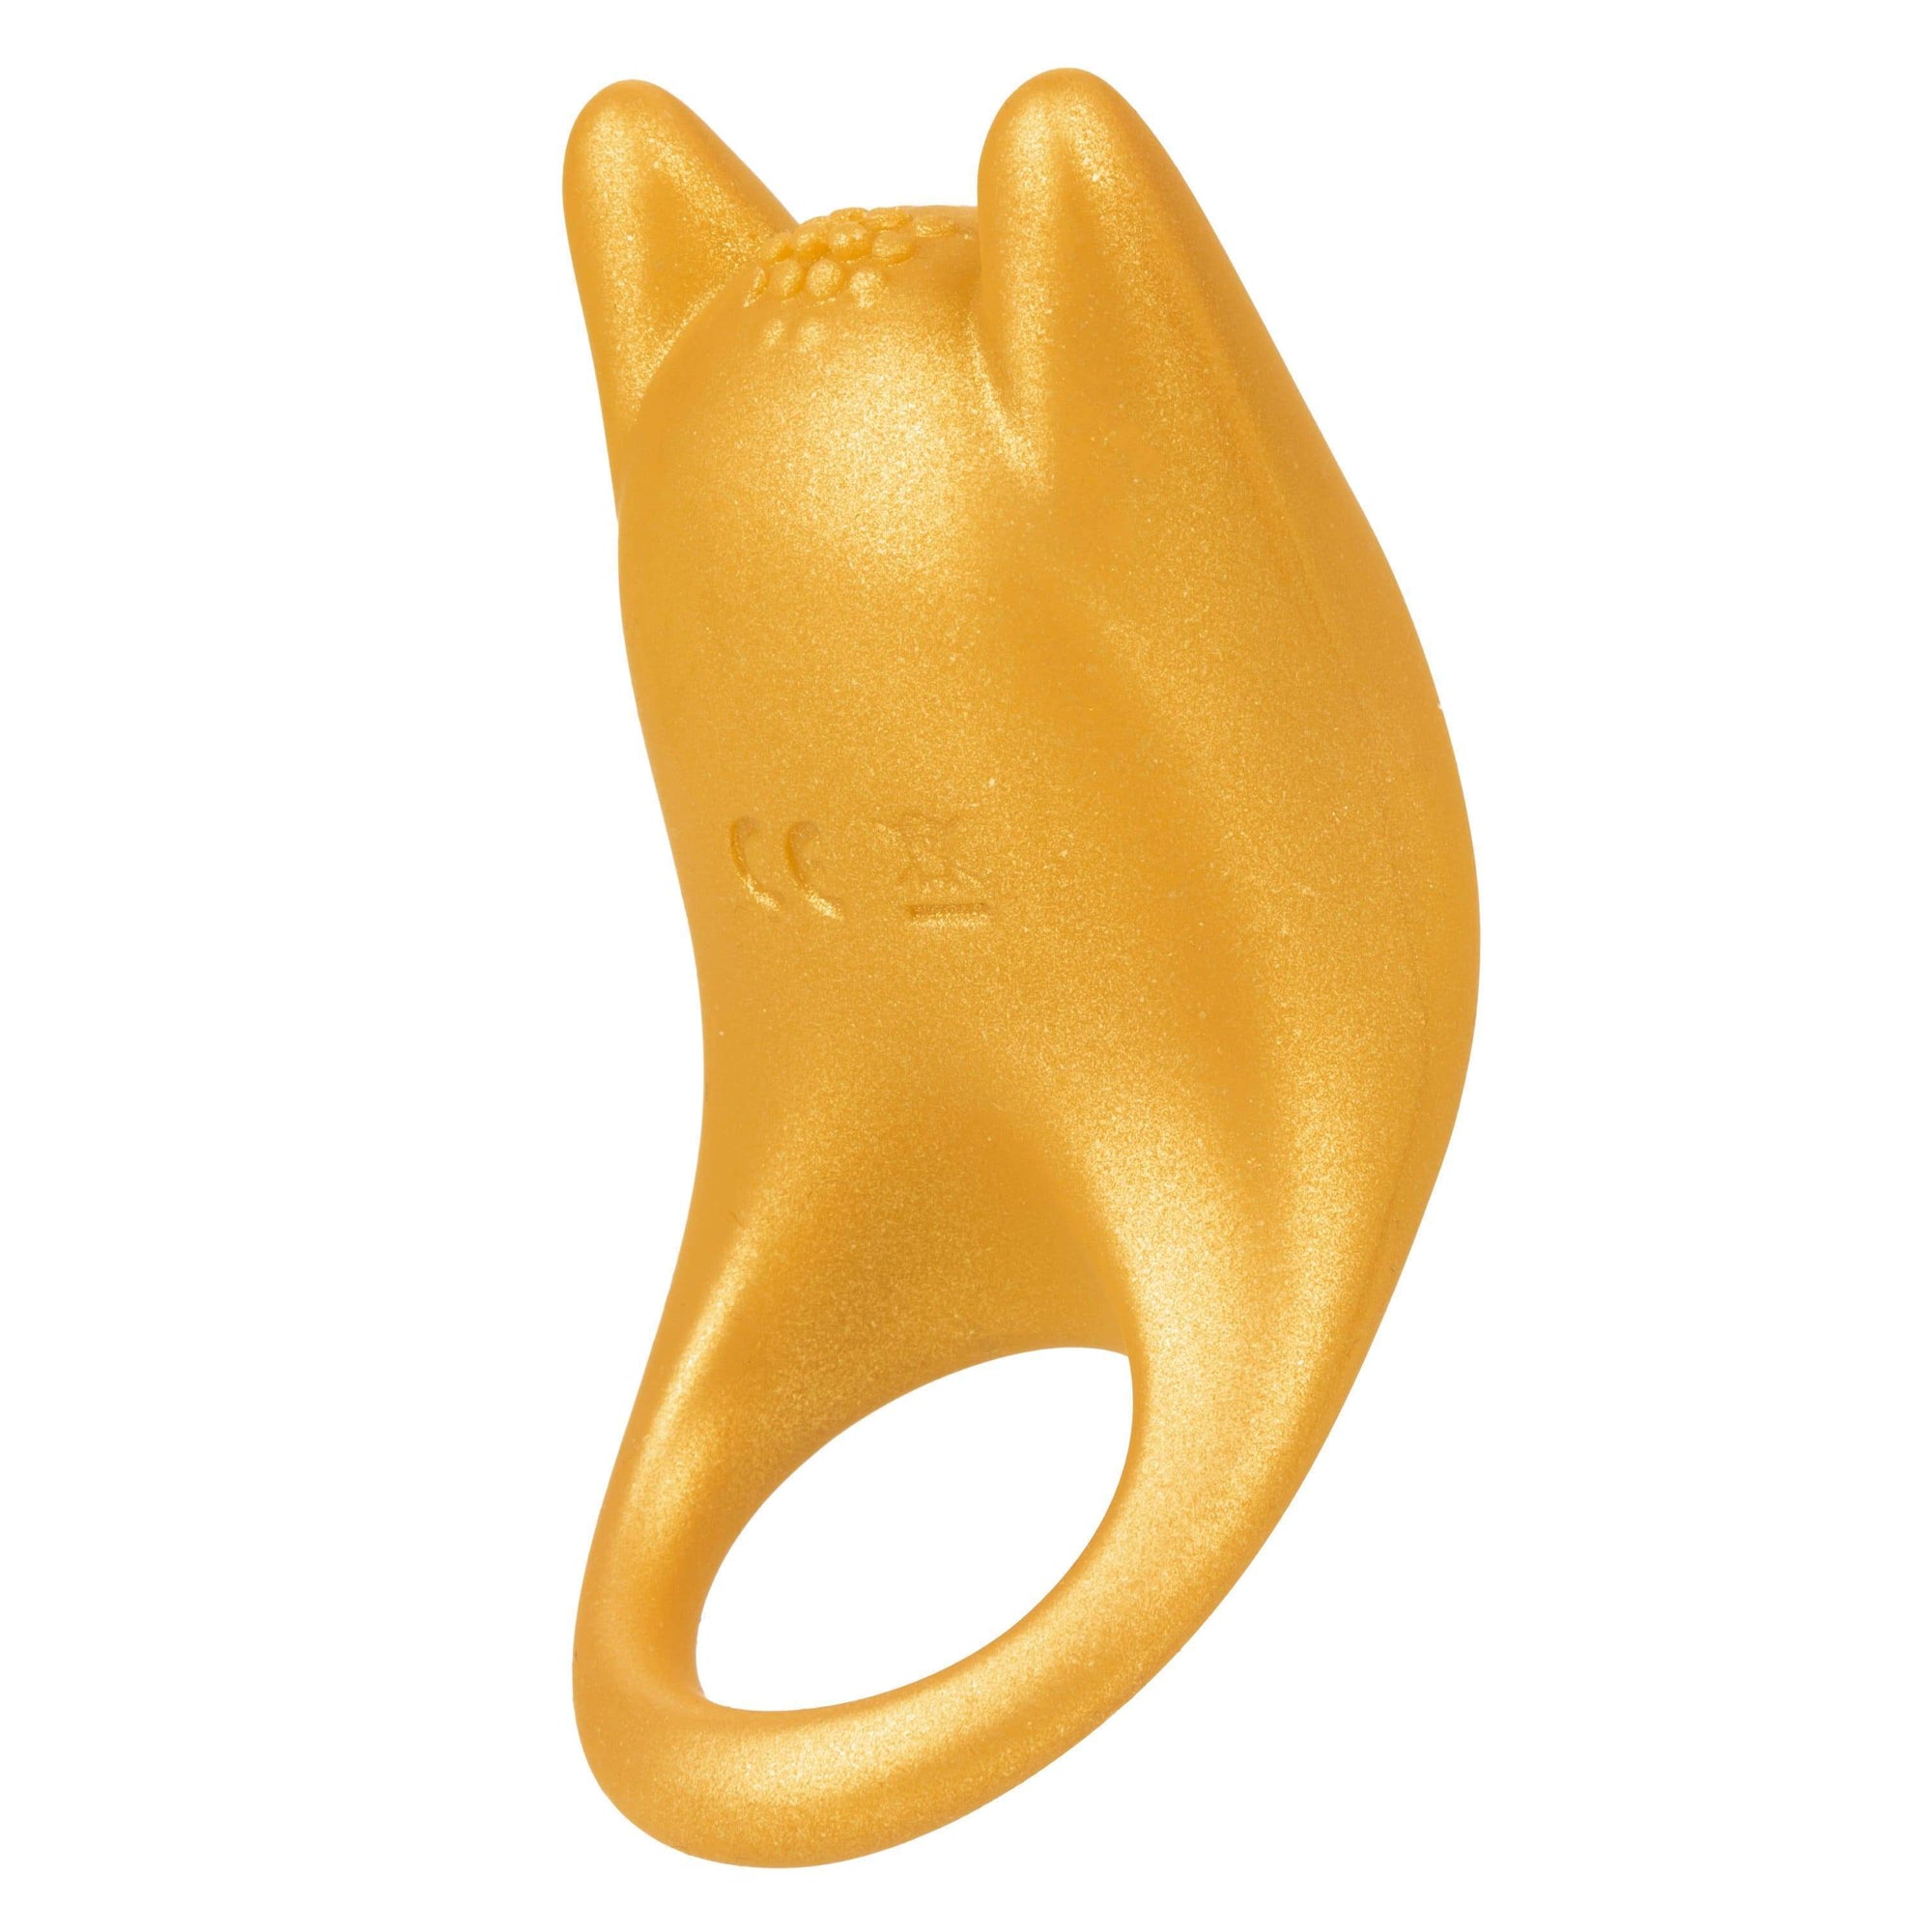 California Exotics - Naughty Bits Horny AF Vibrating Cock Ring (Yellow) Silicone Cock Ring (Vibration) Rechargeable 716770094414 CherryAffairs